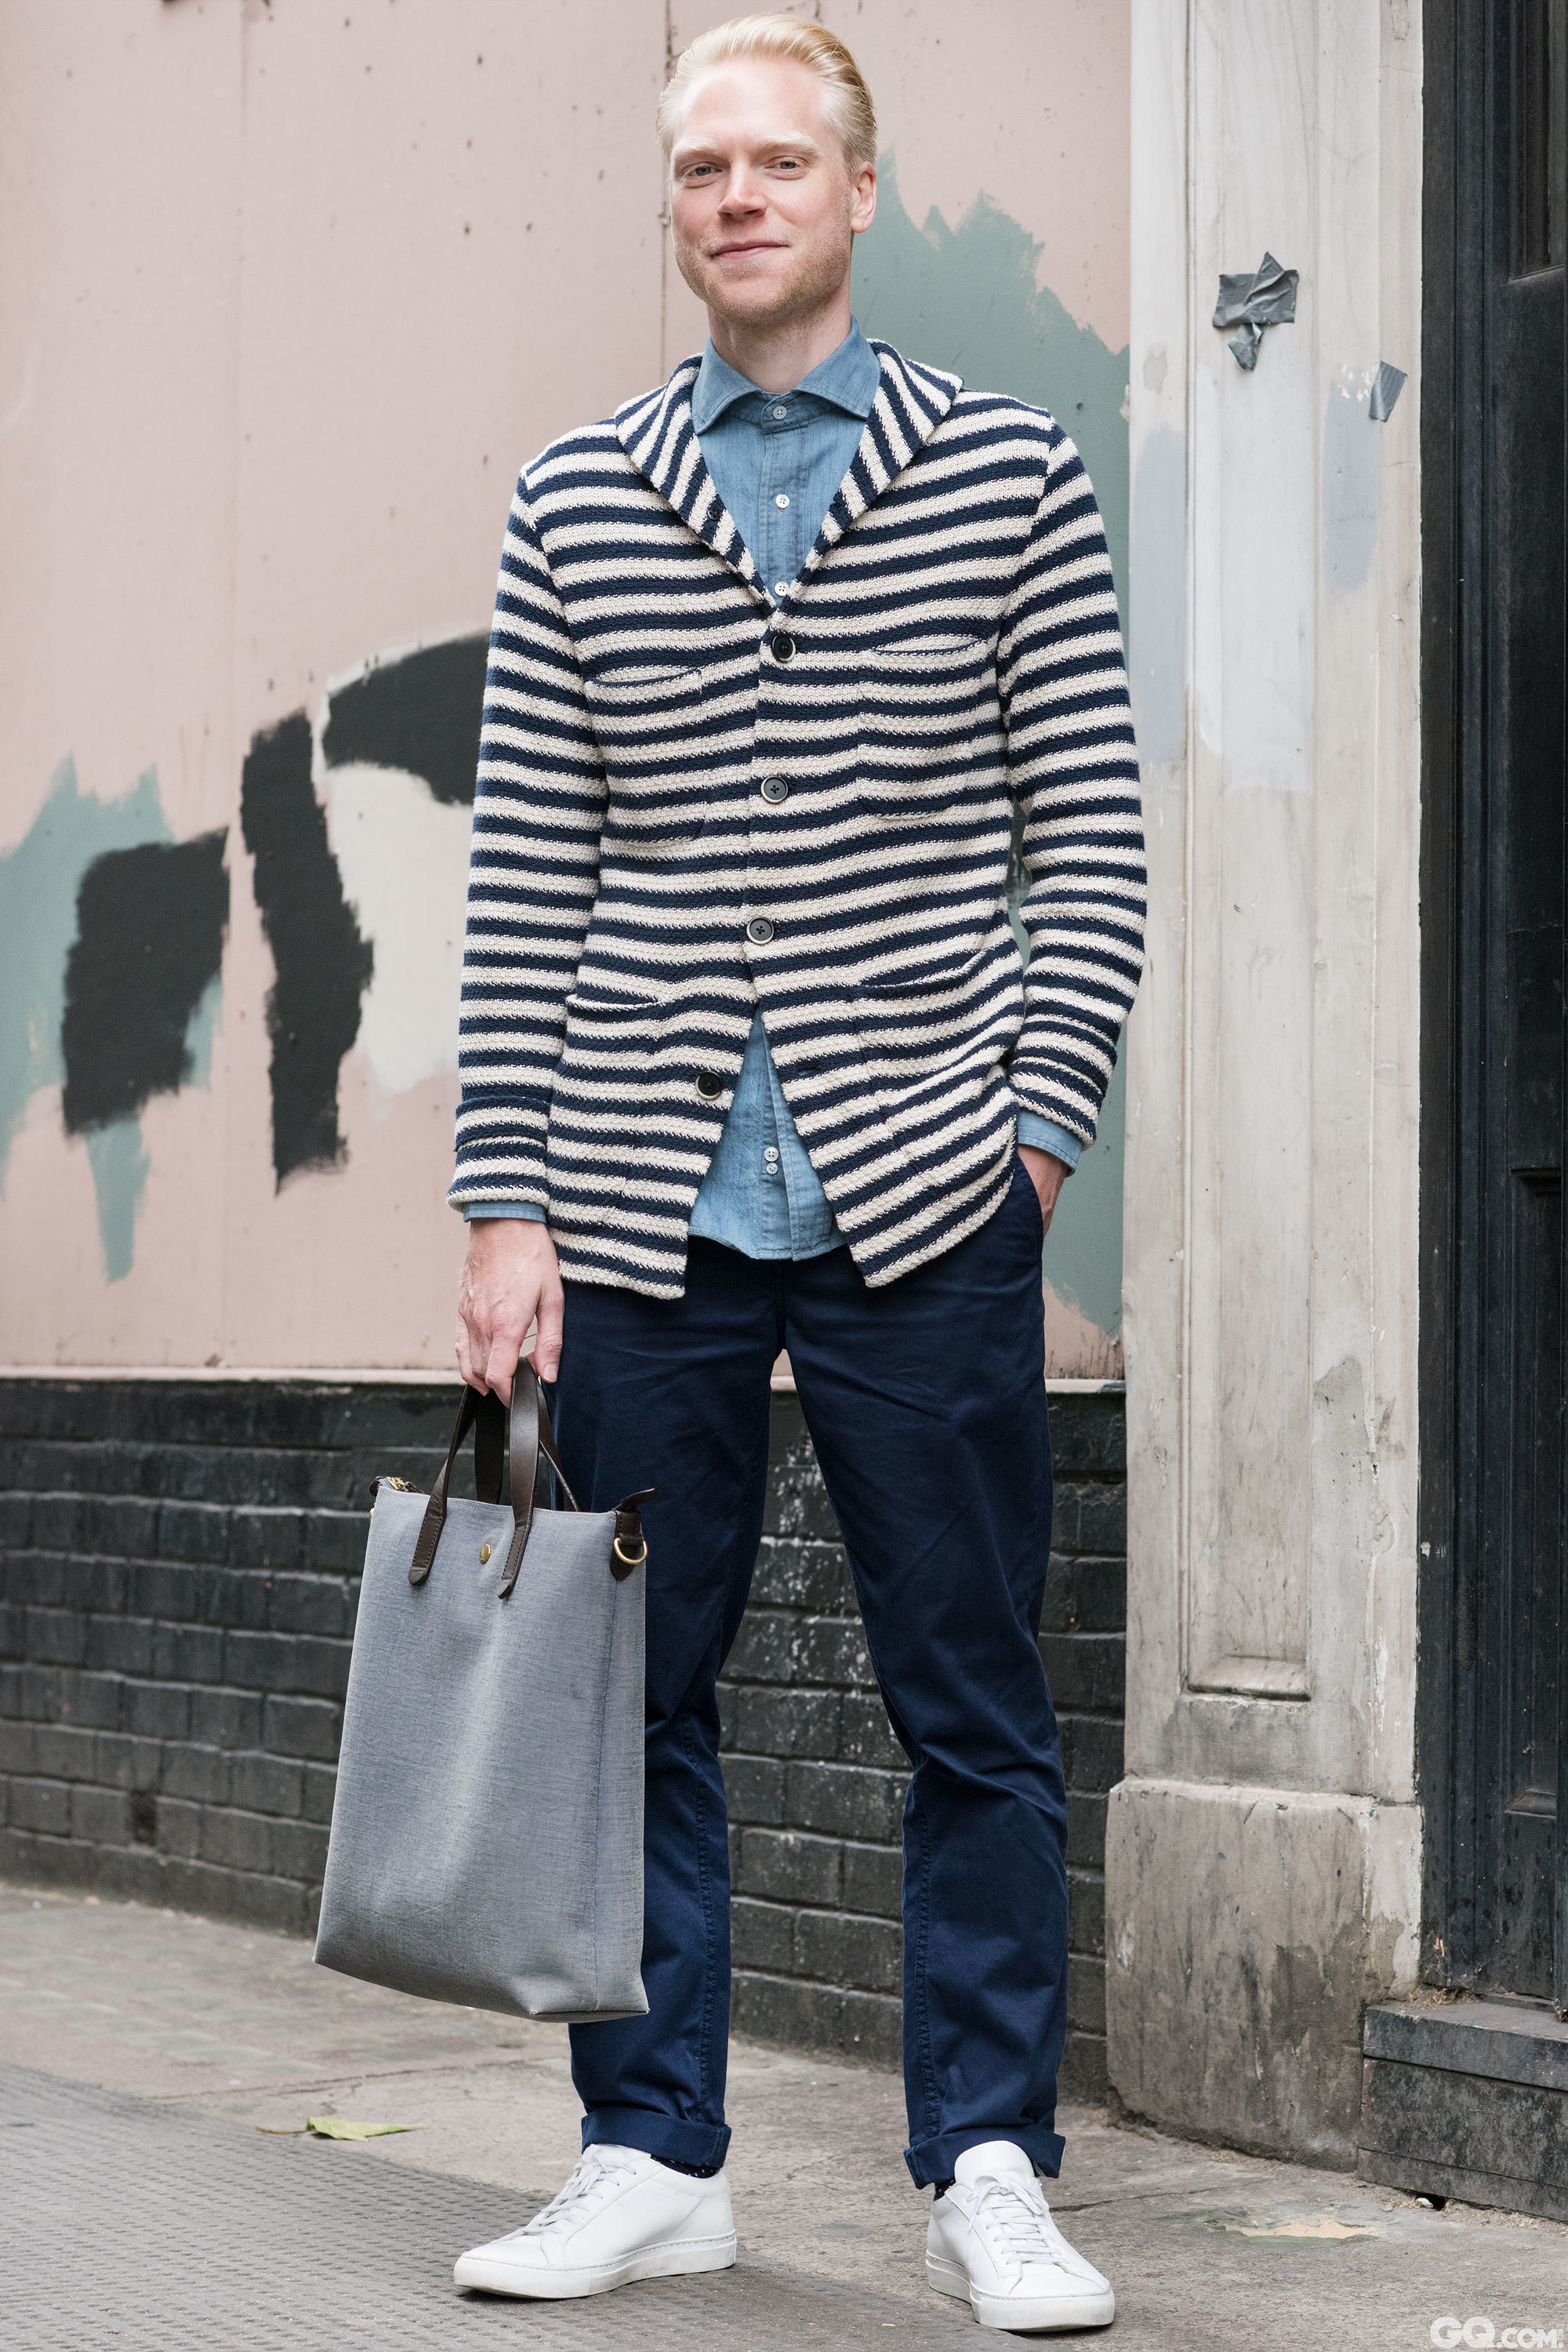 Sam
Jacket: Borino
T-shirt: Drakes
Trousers: Acne
Shoes: Common Projects
Bag: Mismo

Inspiration: Today was a mix of different shades of blues. 今天就是让深浅不一的蓝色混搭起来。